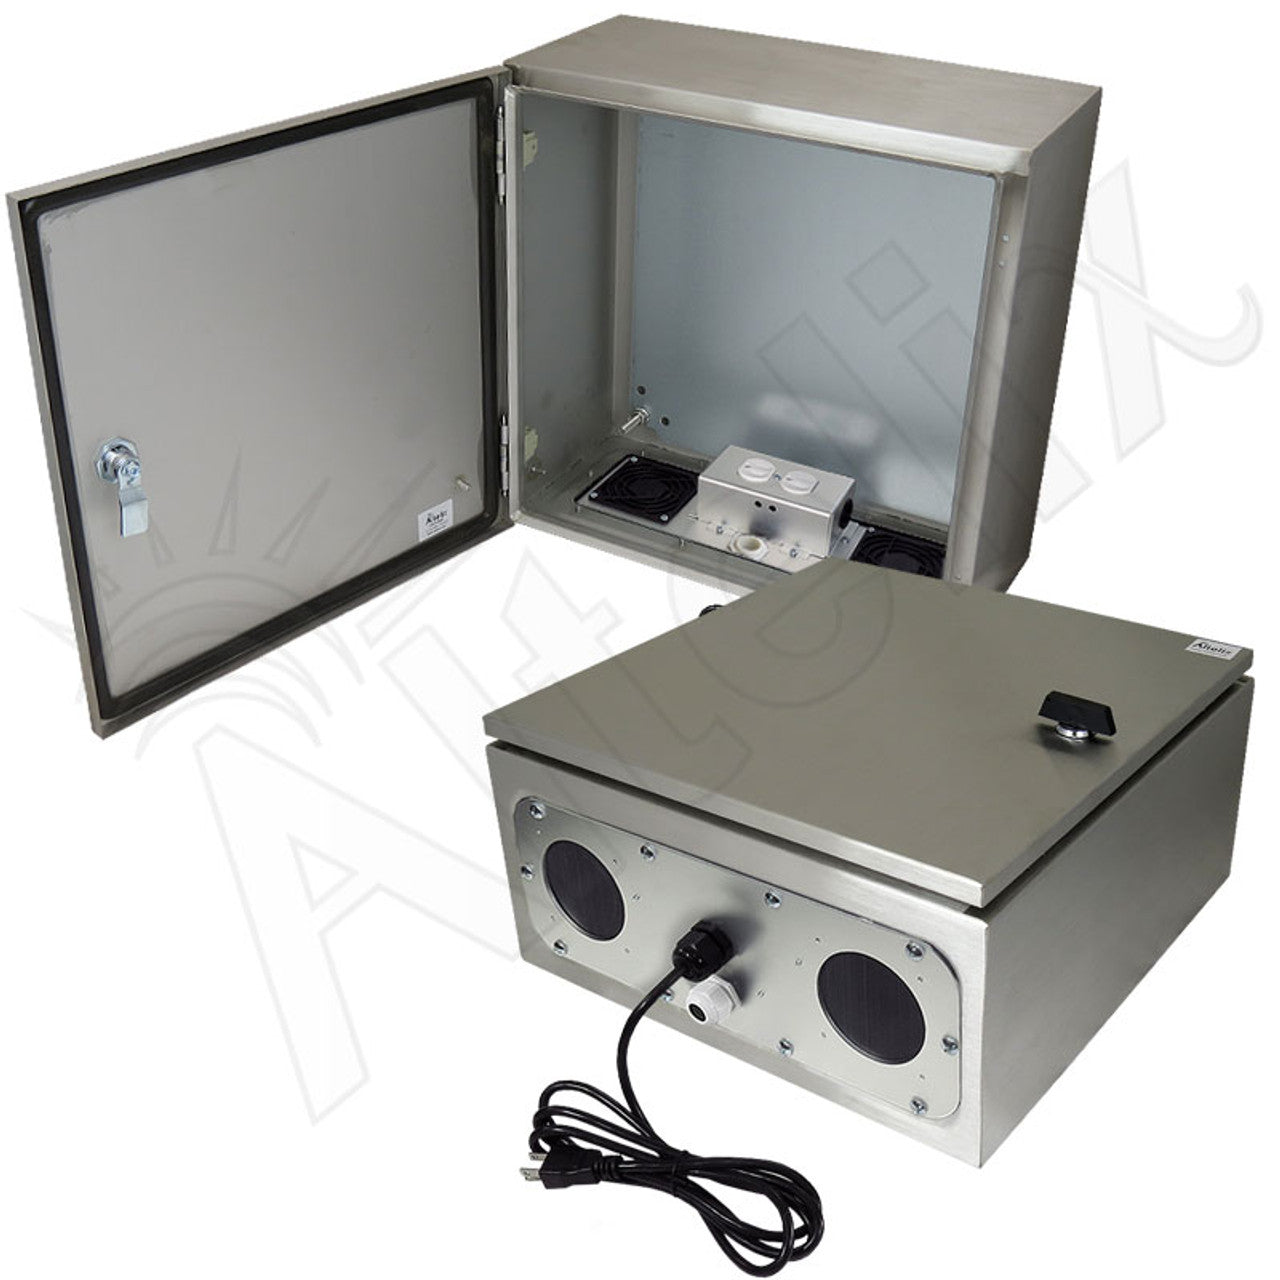 Altelix Vented Stainless Steel Weatherproof NEMA Enclosure with 120 VAC Outlets and Power Cord